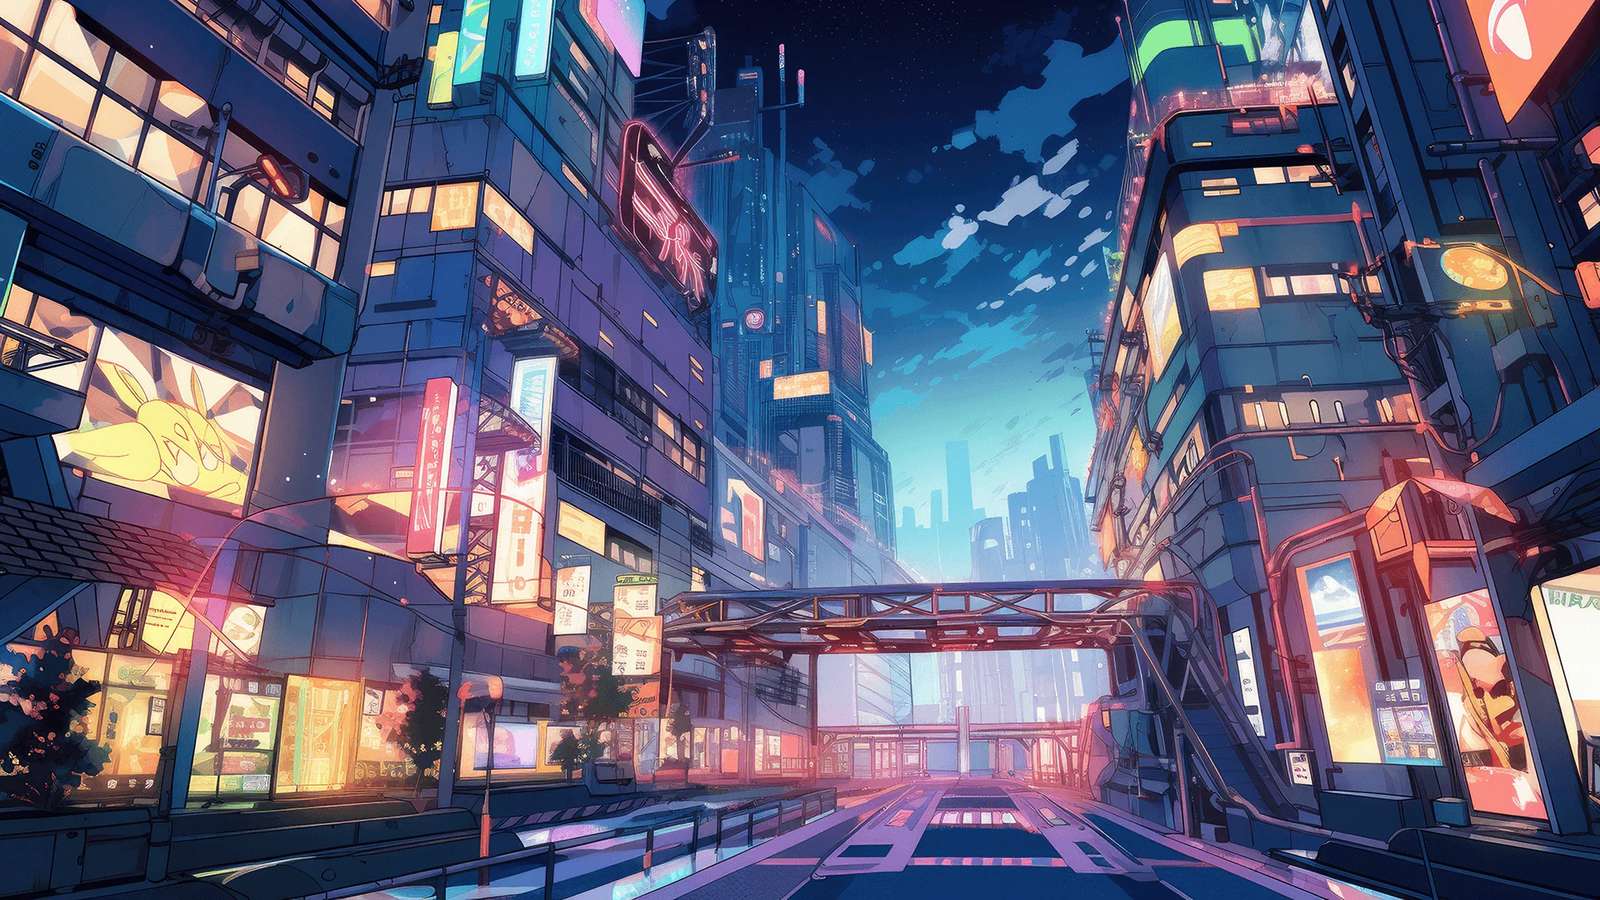 Unreal City of the Future online puzzle